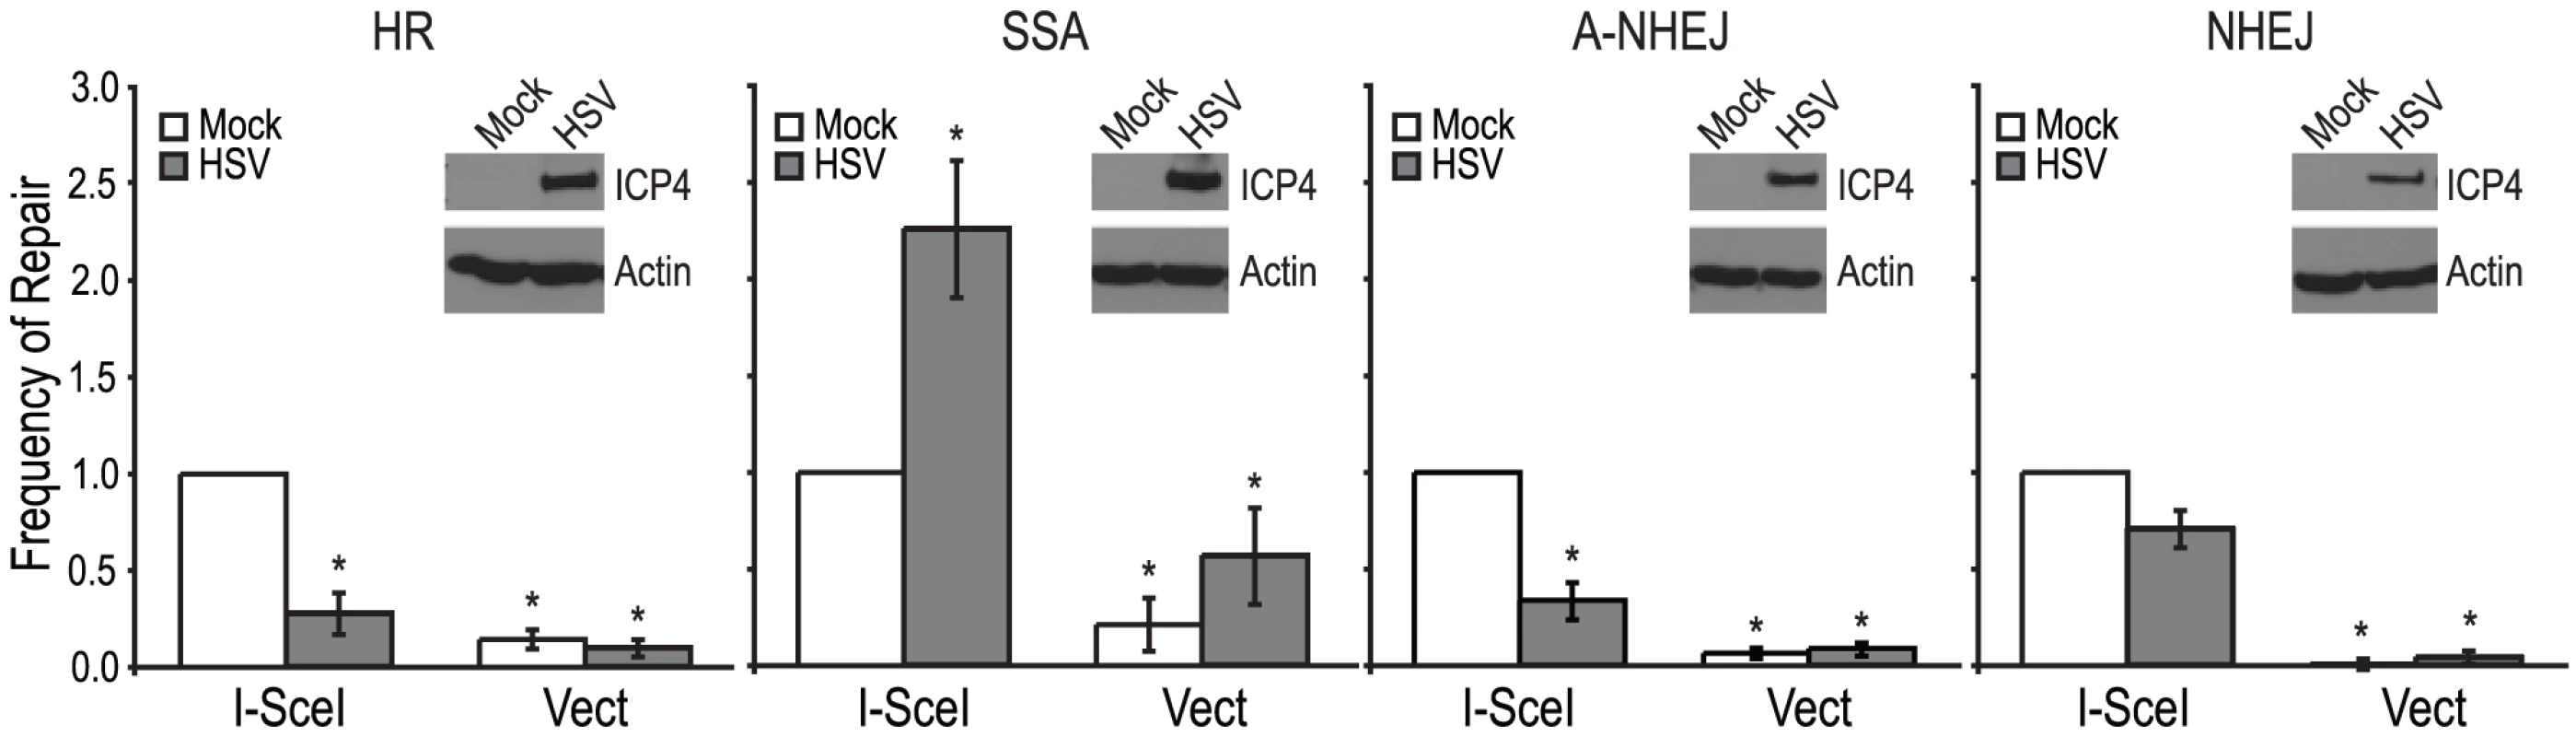 HSV infection increases SSA and inhibits HR, A-NHEJ and NHEJ.